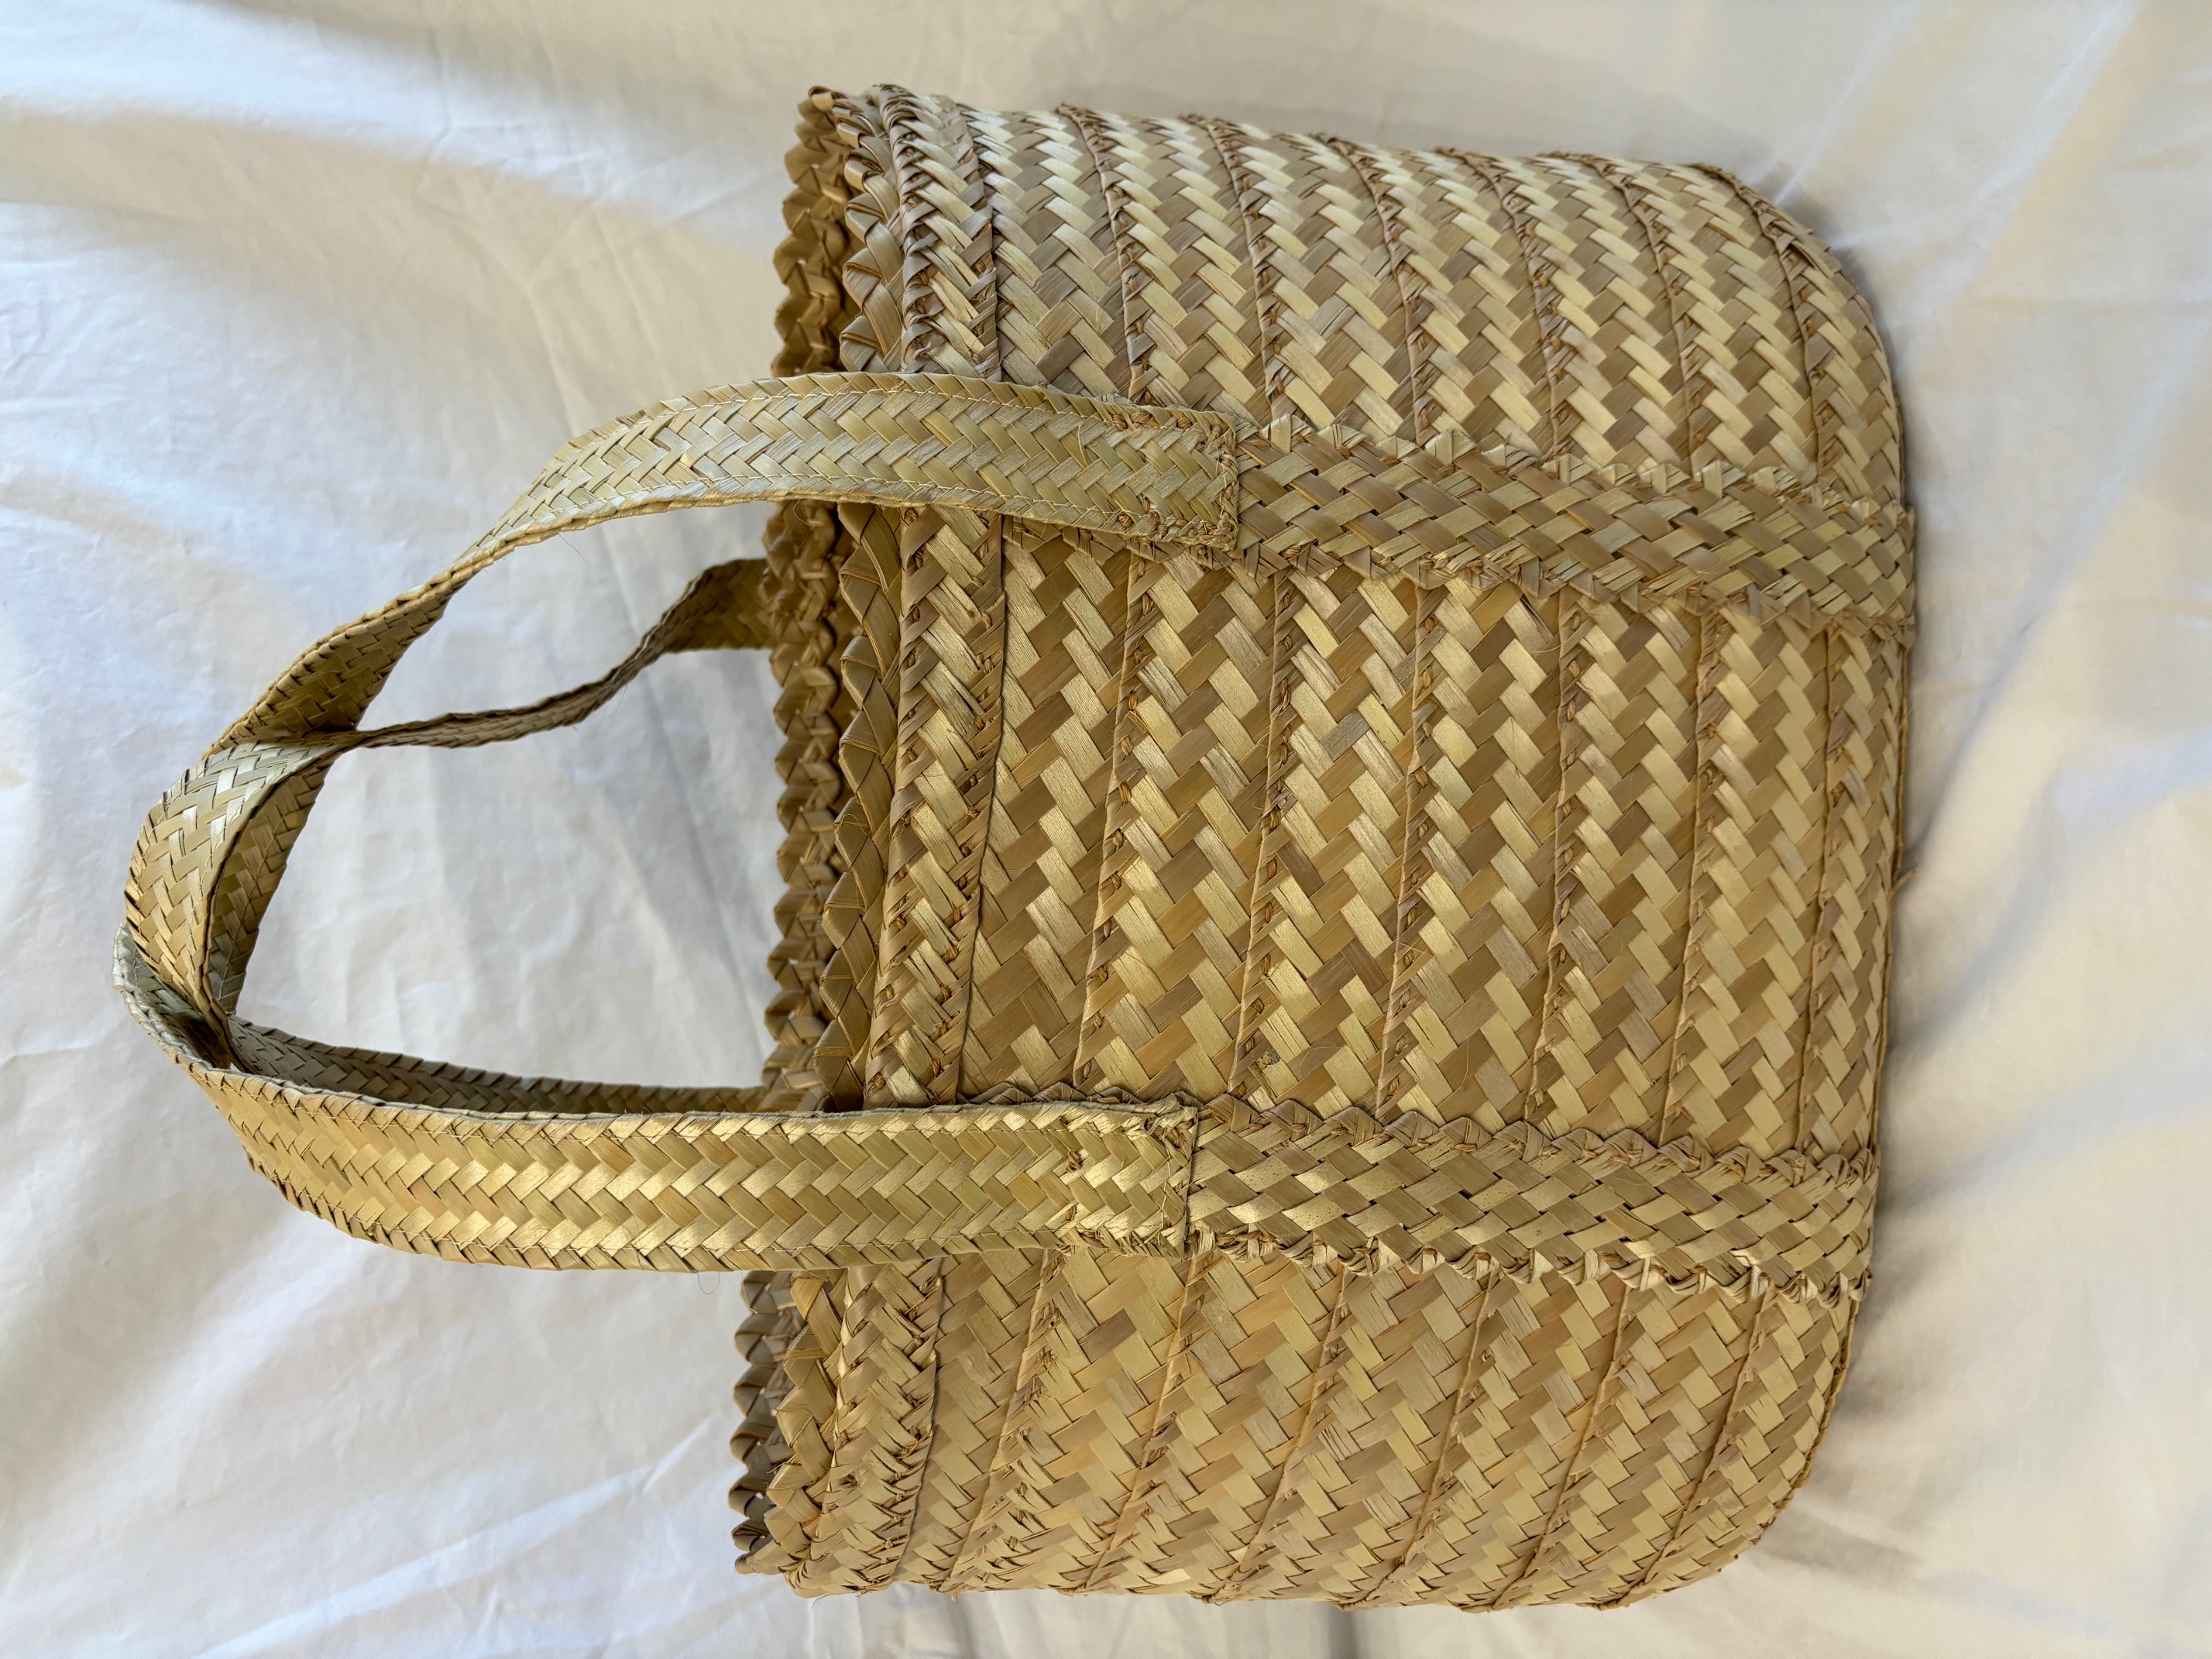 Handmade One-Of-a-Kind Thatched Basket #2 - Click Image to Close